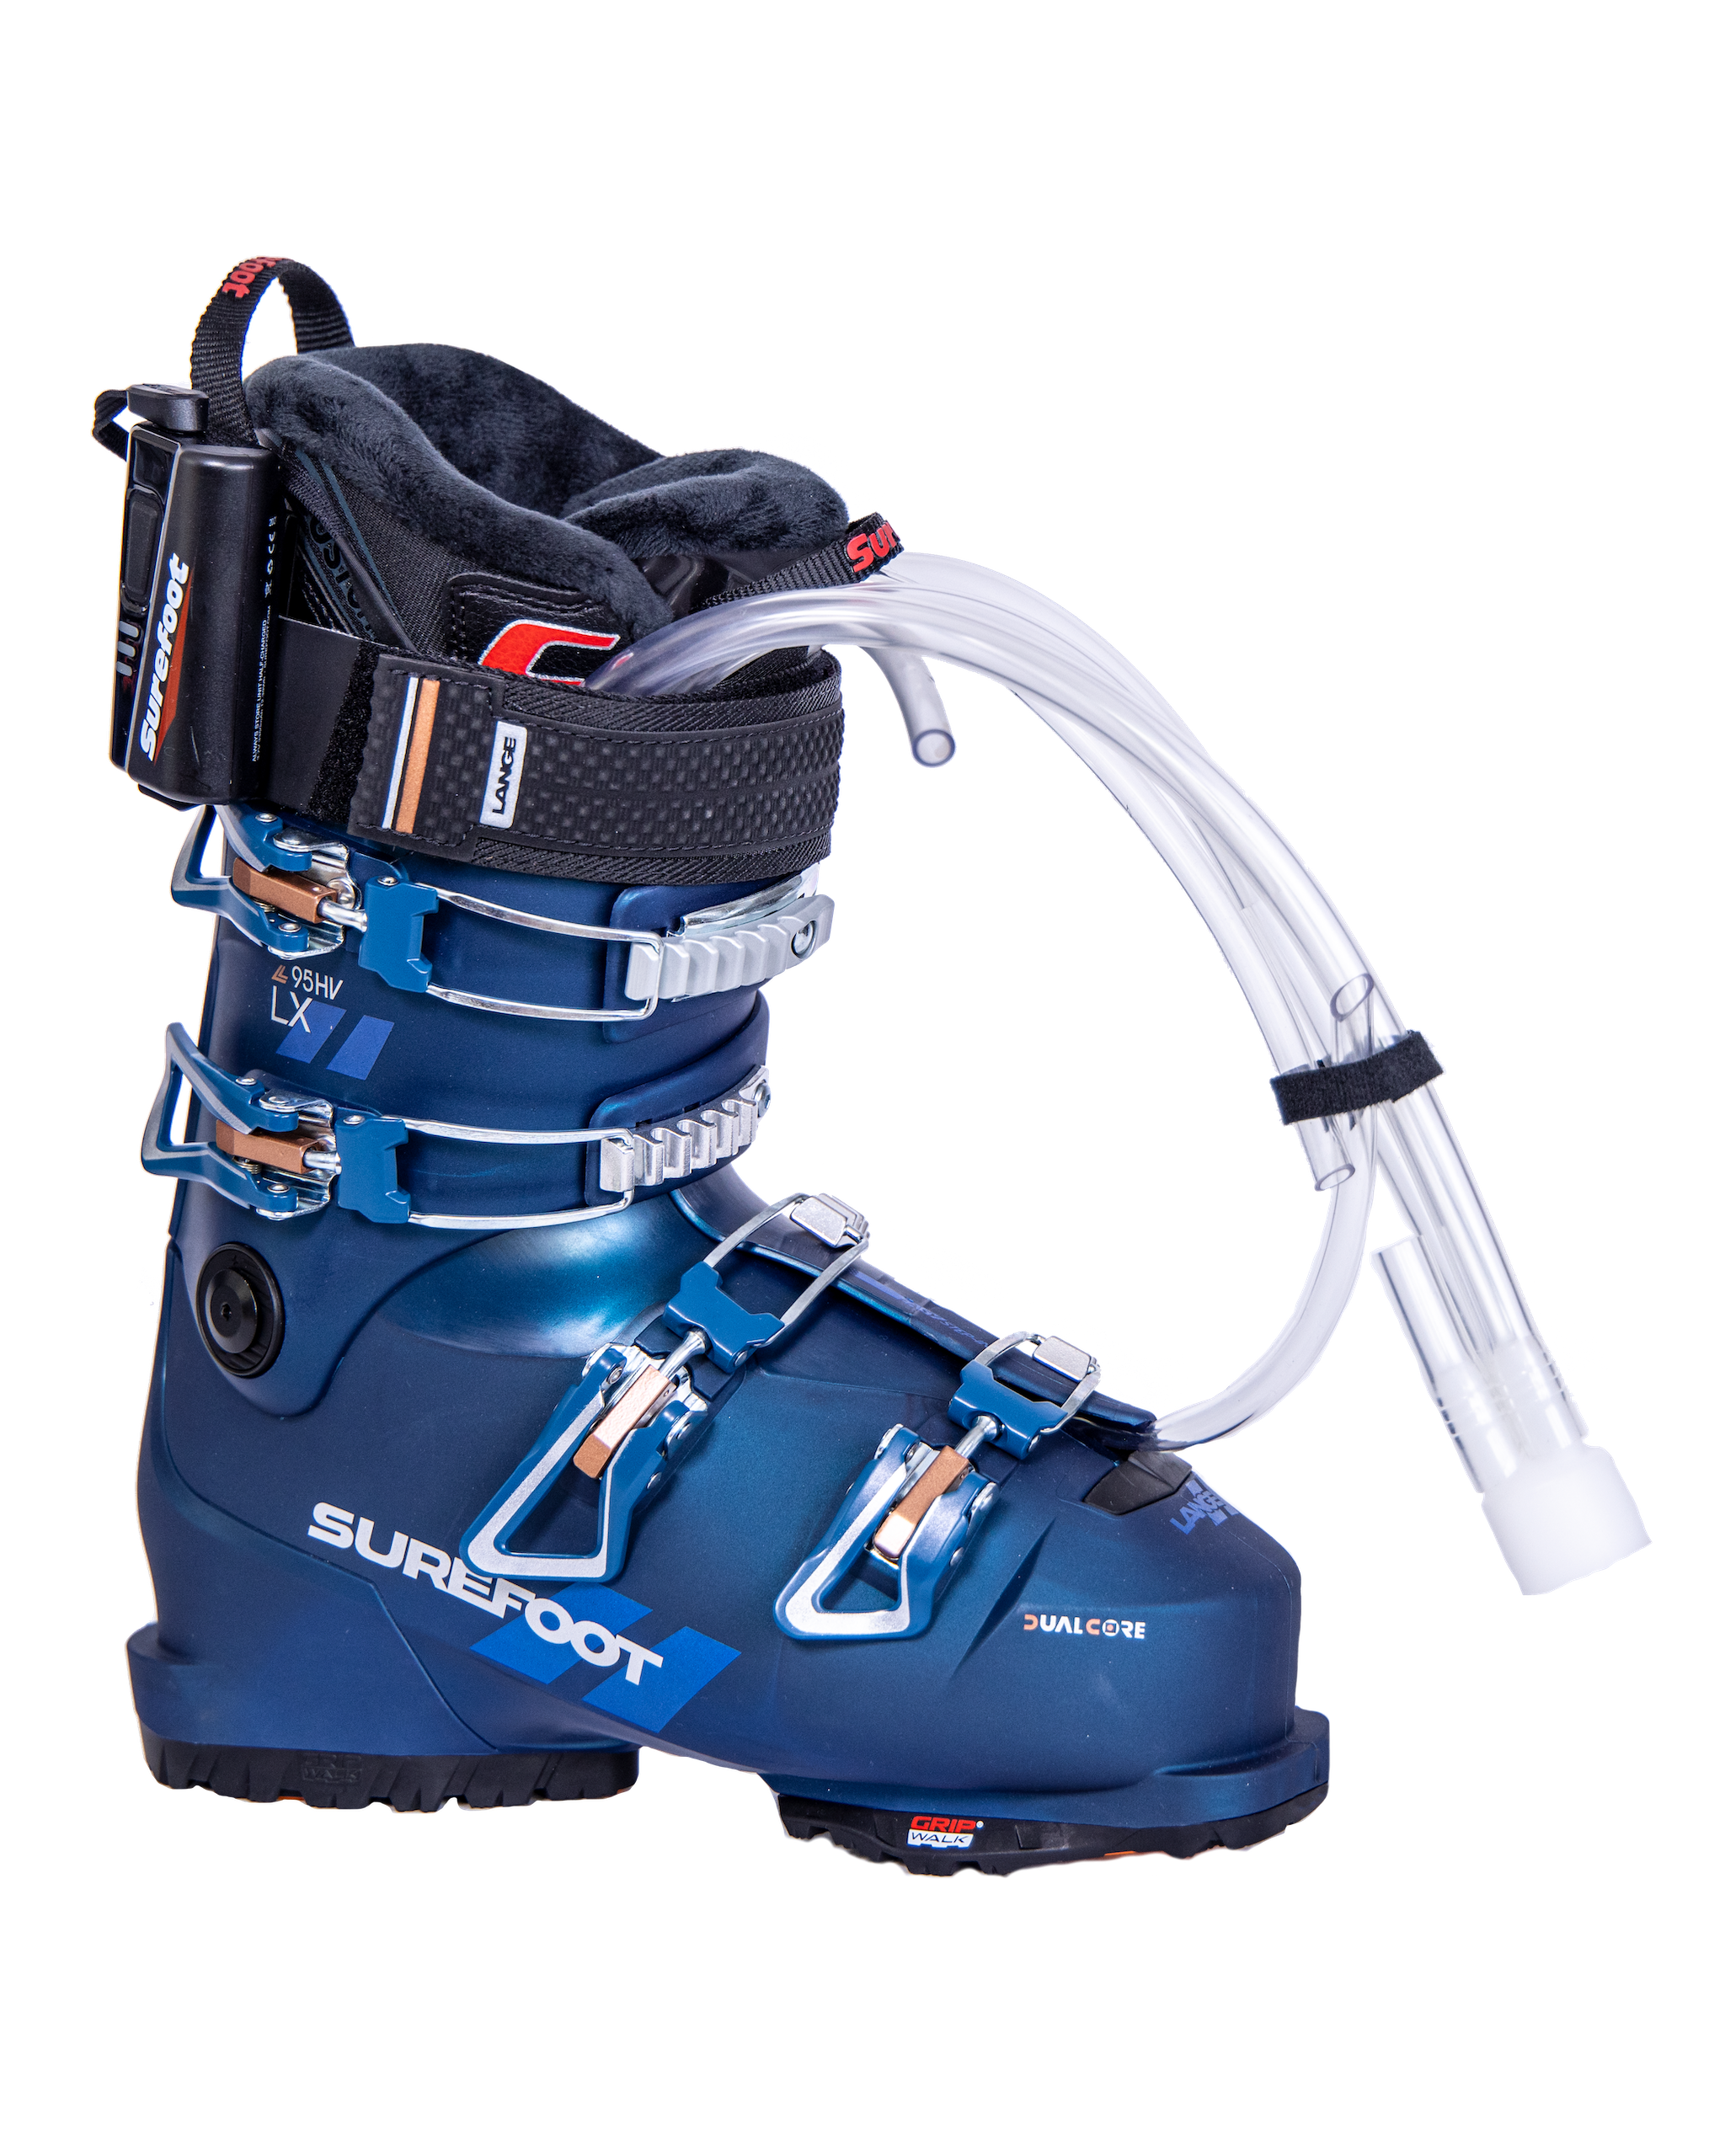 Surefoot Lange LX 95 HV matte blue ski boot shell with gold accents on buckles and Lange logo in small letters on power strap. Surefoot logo in white. Plastic tubes coming out for Surefoot memory foam injection into shell lining. Winterheat ski boot heater attached to outside edge.